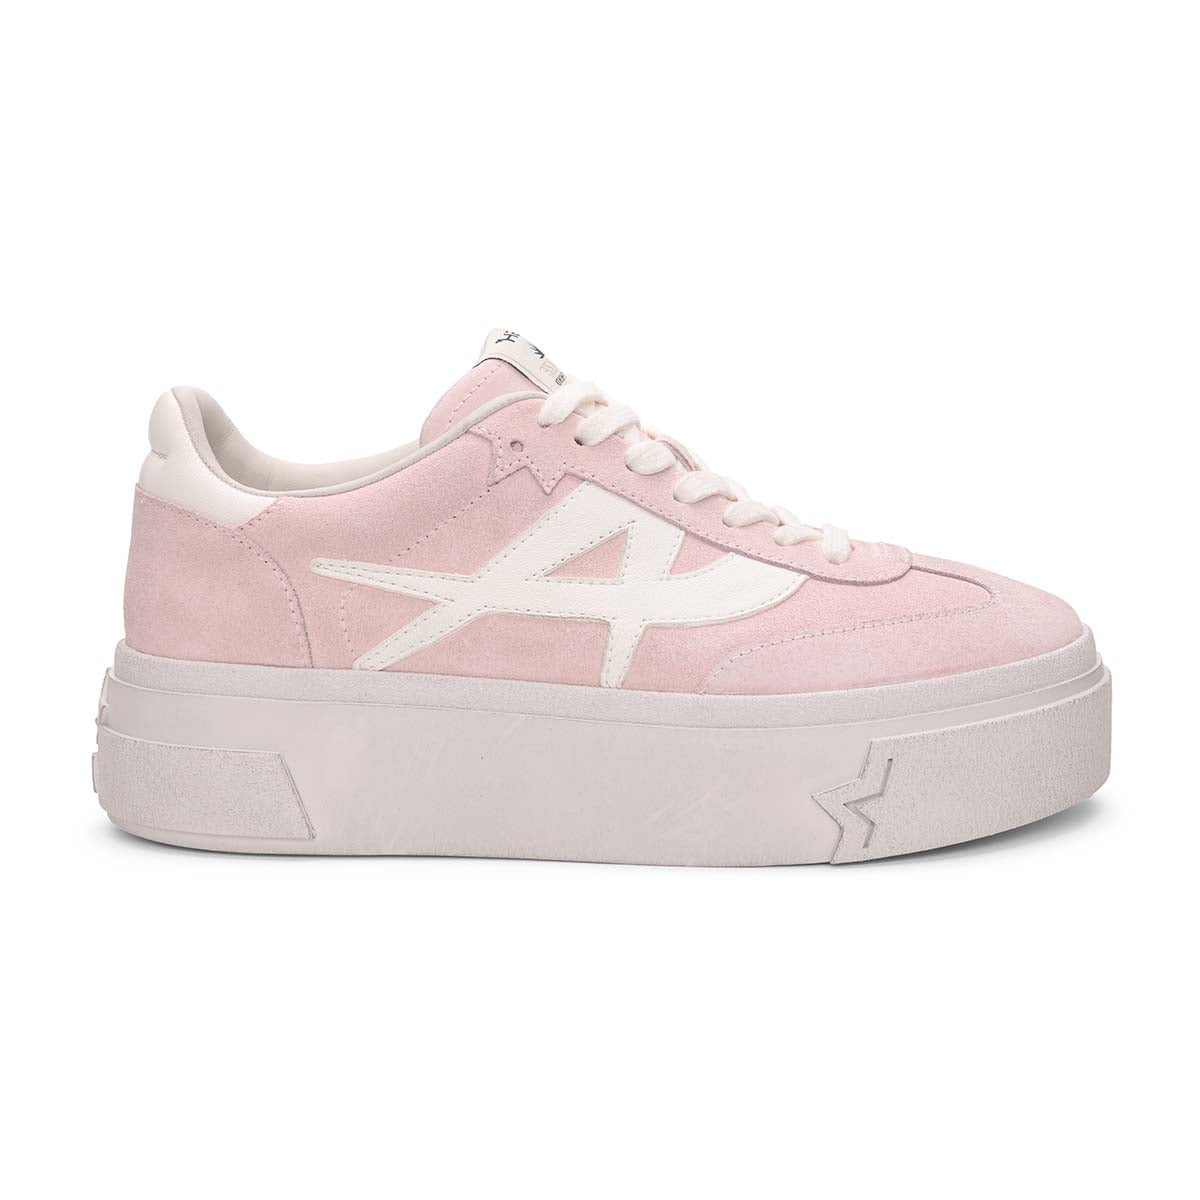 Starmoon Suede Platform Sneakers - Pink/White - Side View - ASH